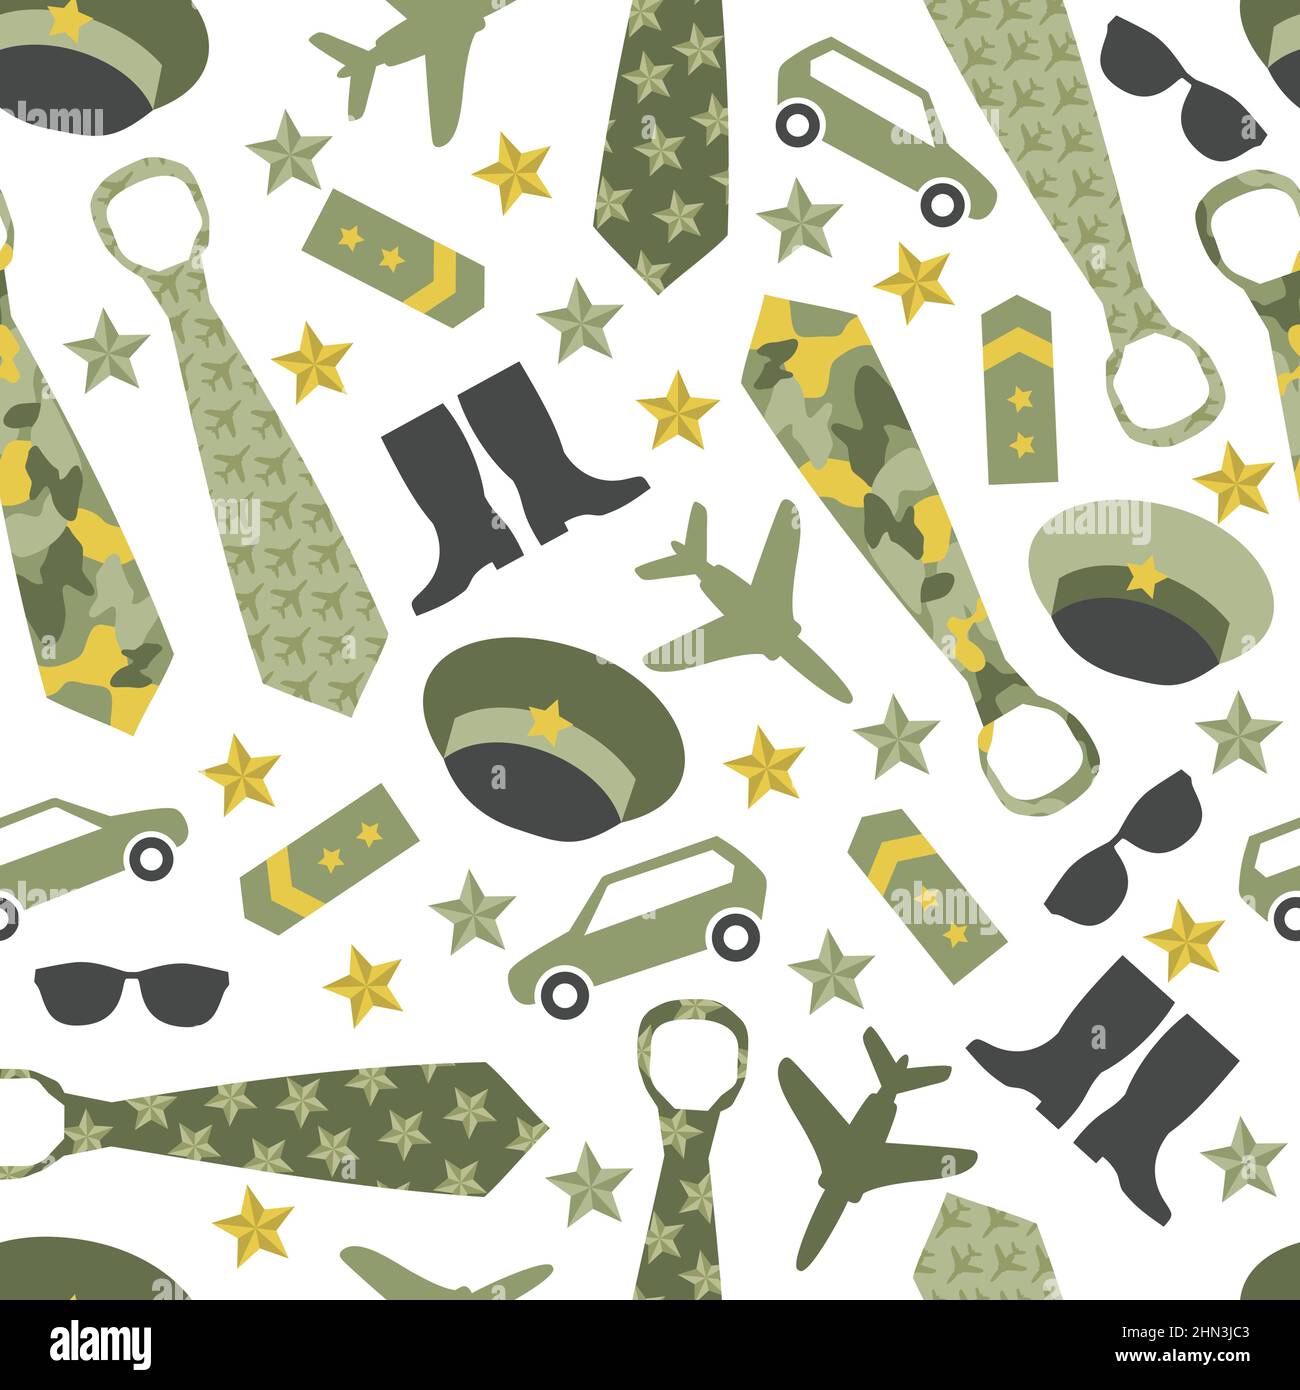 Seamless vector pattern of military icons on a white background. Wrapping paper. Stock Vector